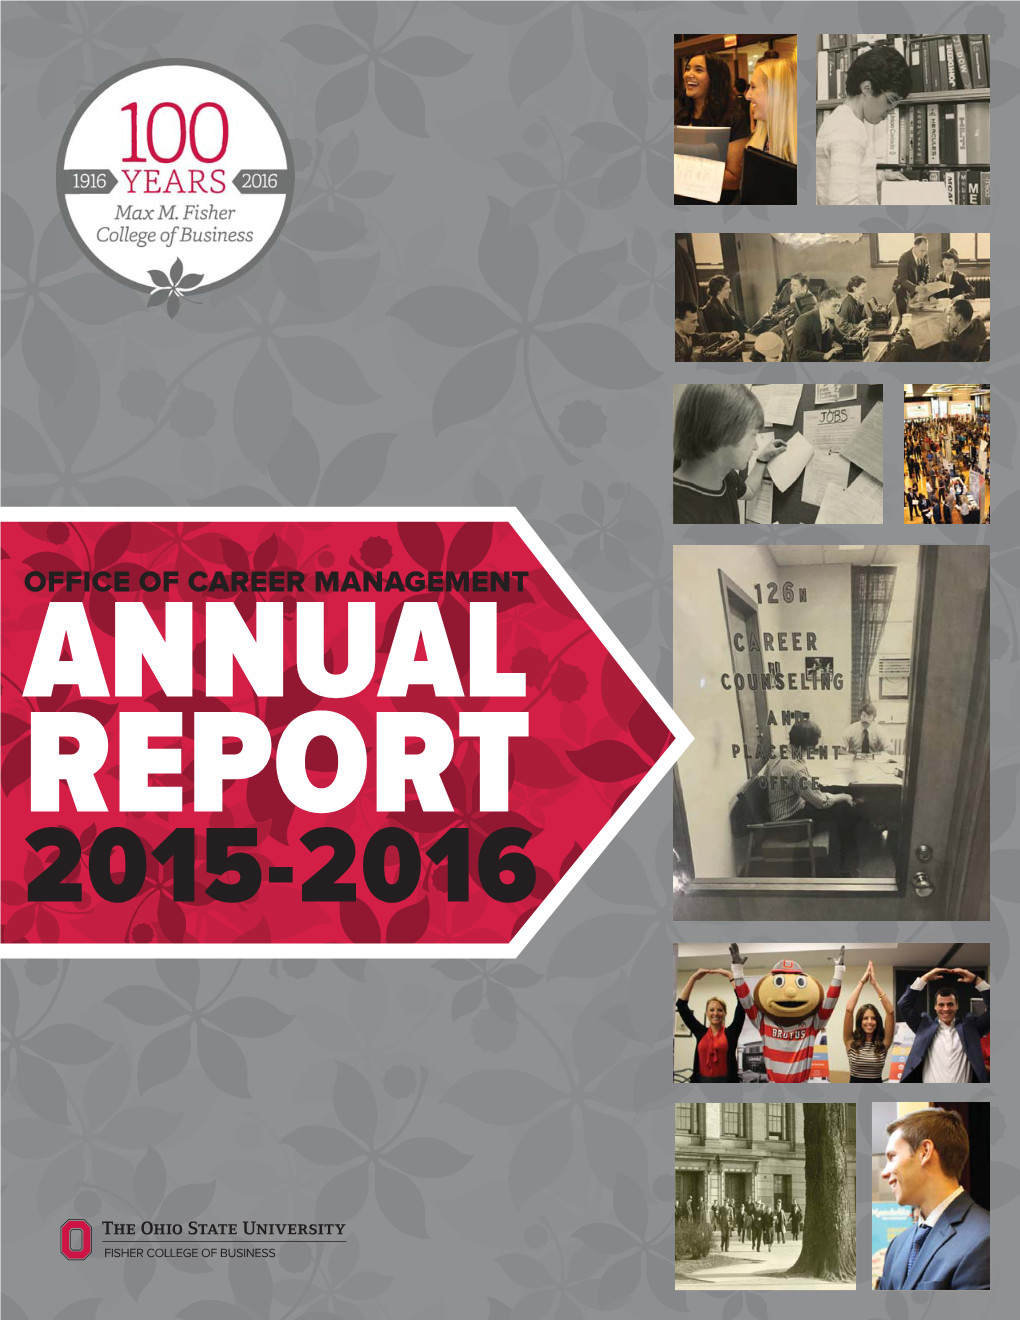 OFFICE of CAREER MANAGEMENT REPORT 2015-2016 Dear Friends of the Max M